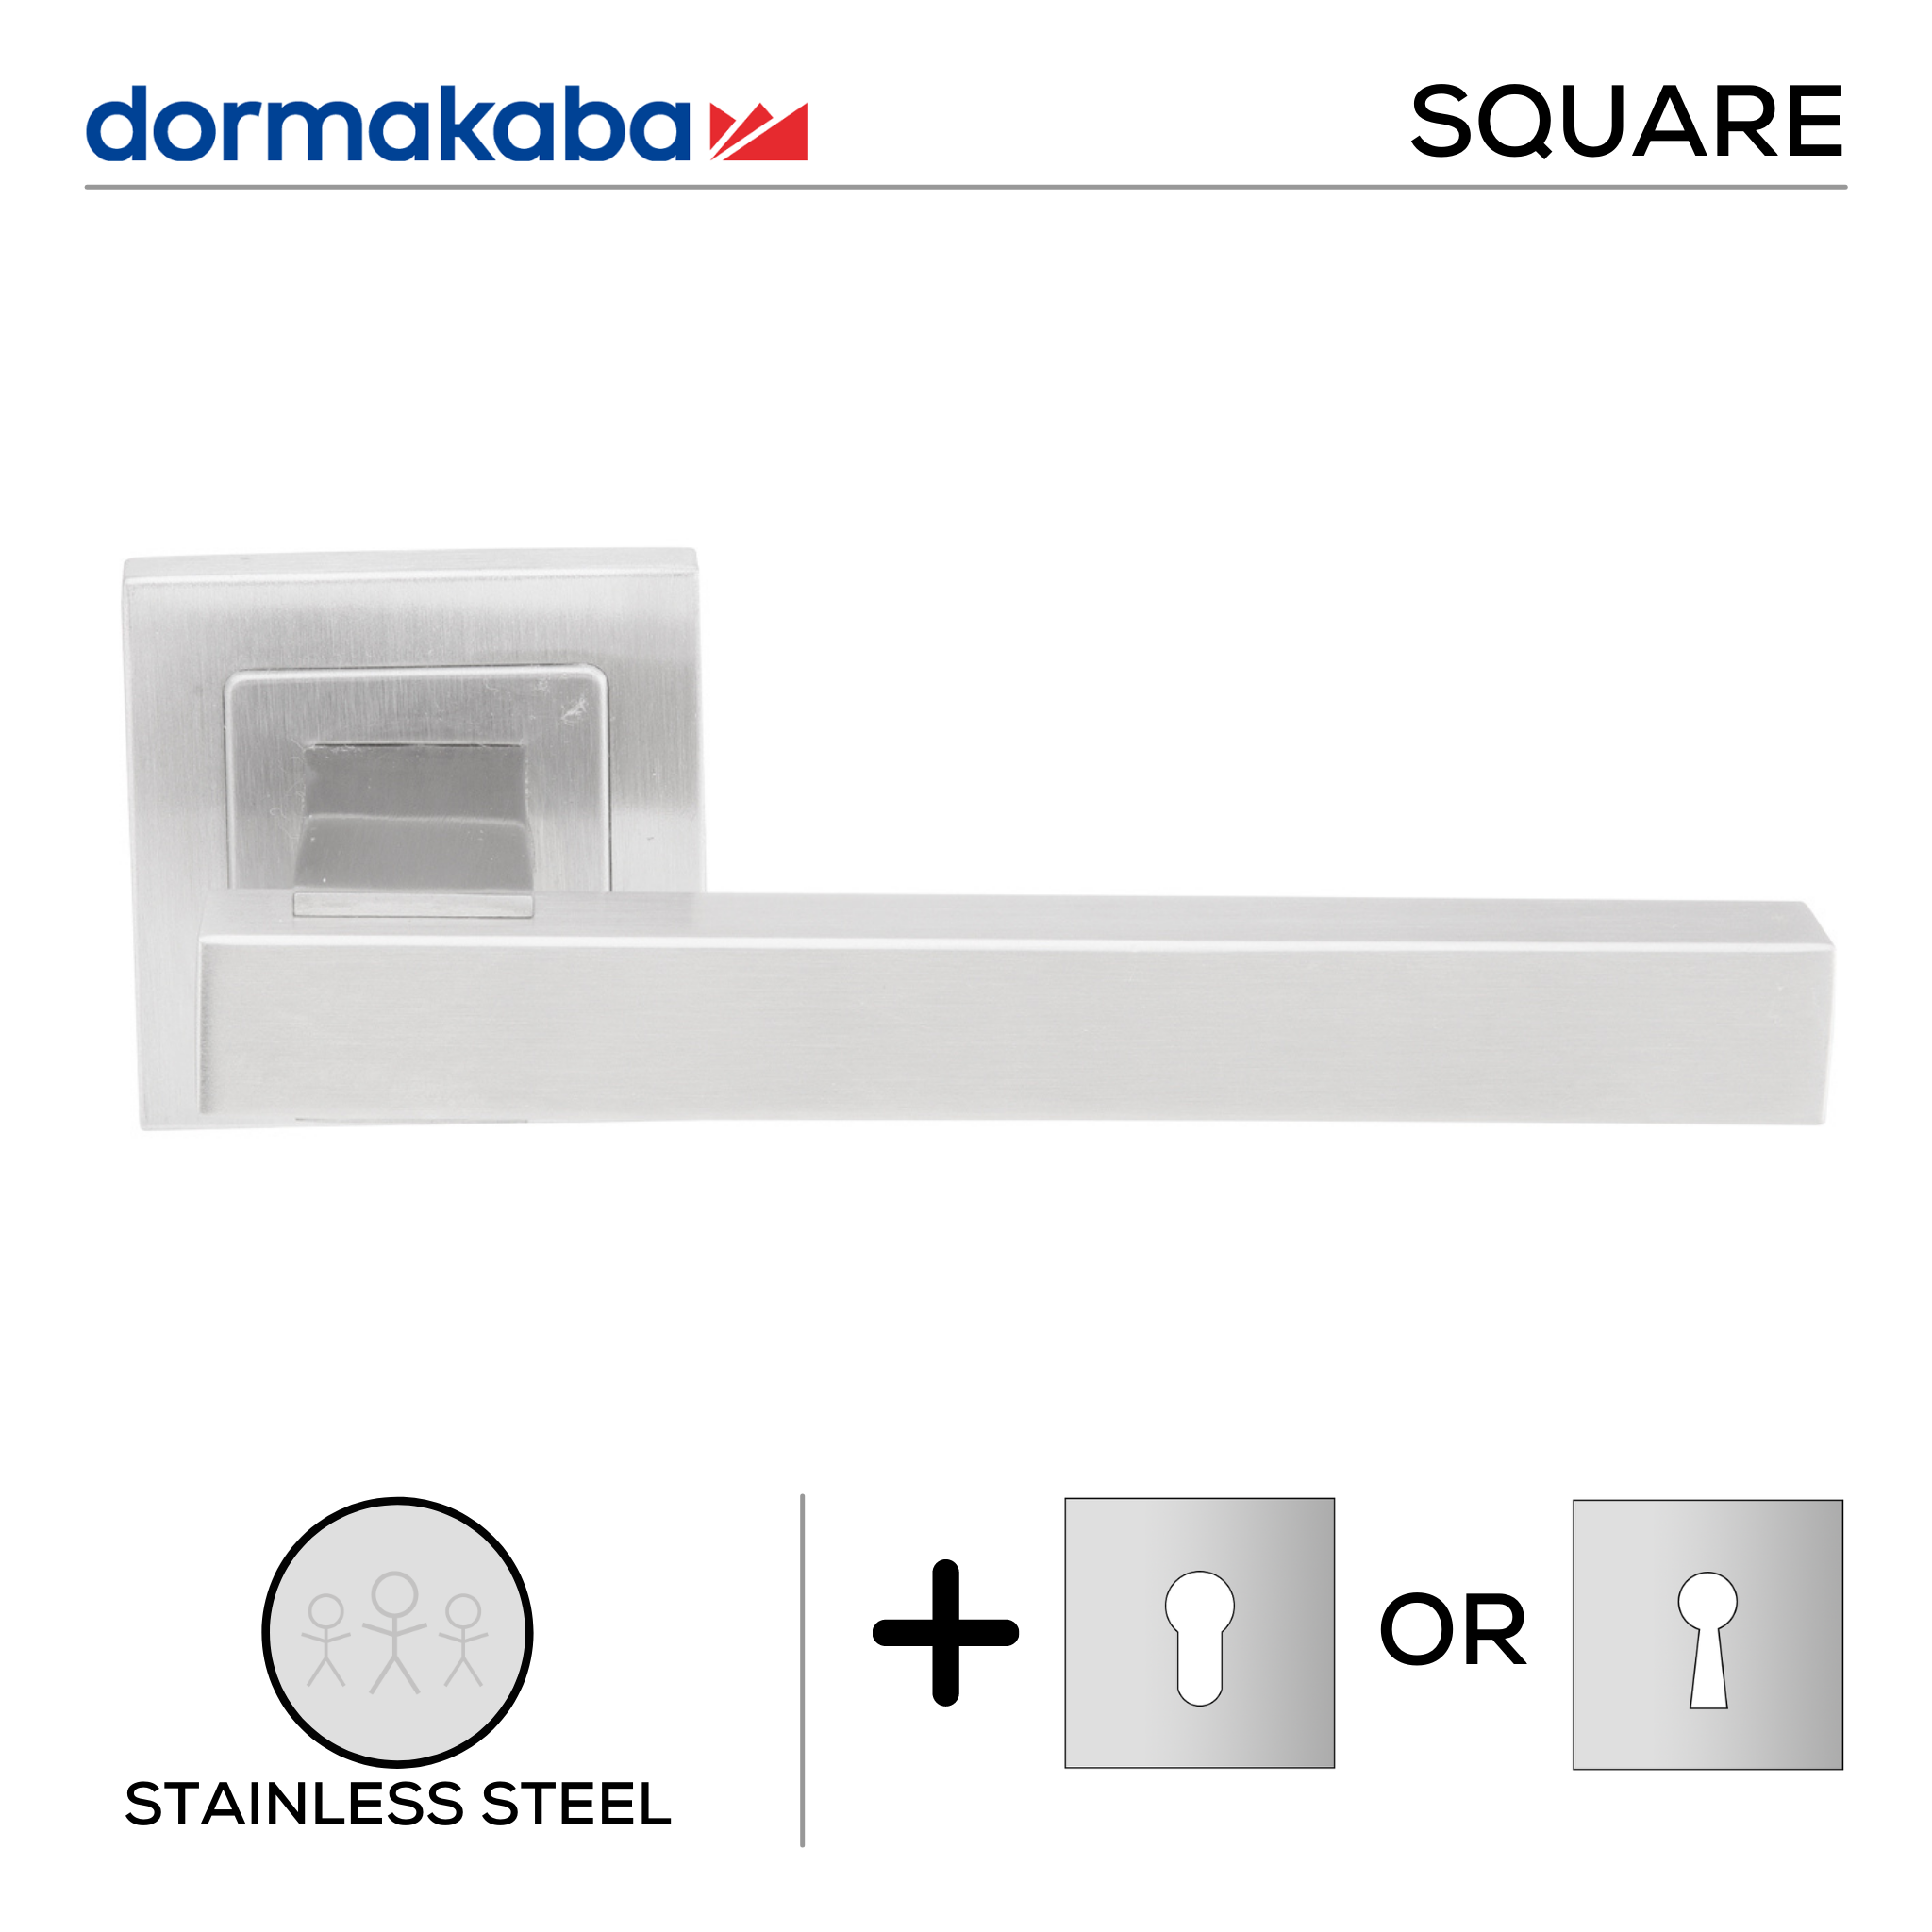 DSQ 902, Lever Handles, Square, On Square Rose, With Escutcheons, 145mm (l), Stainless Steel, DORMAKABA